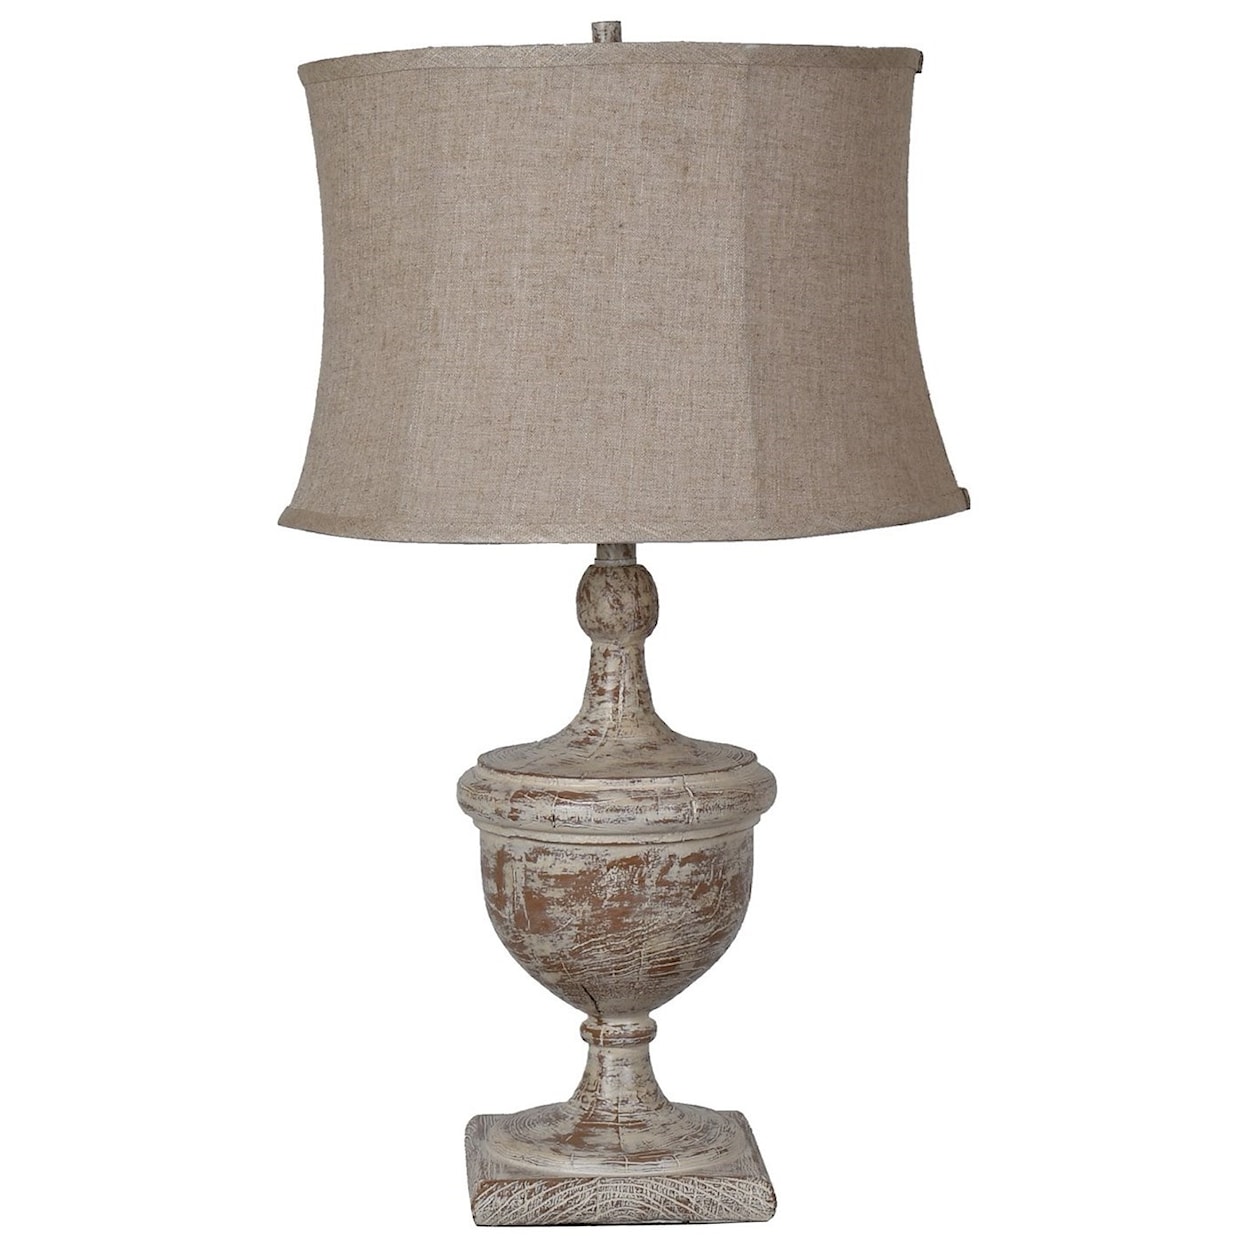 Crestview Collection Lighting Dumont Table Lamp 